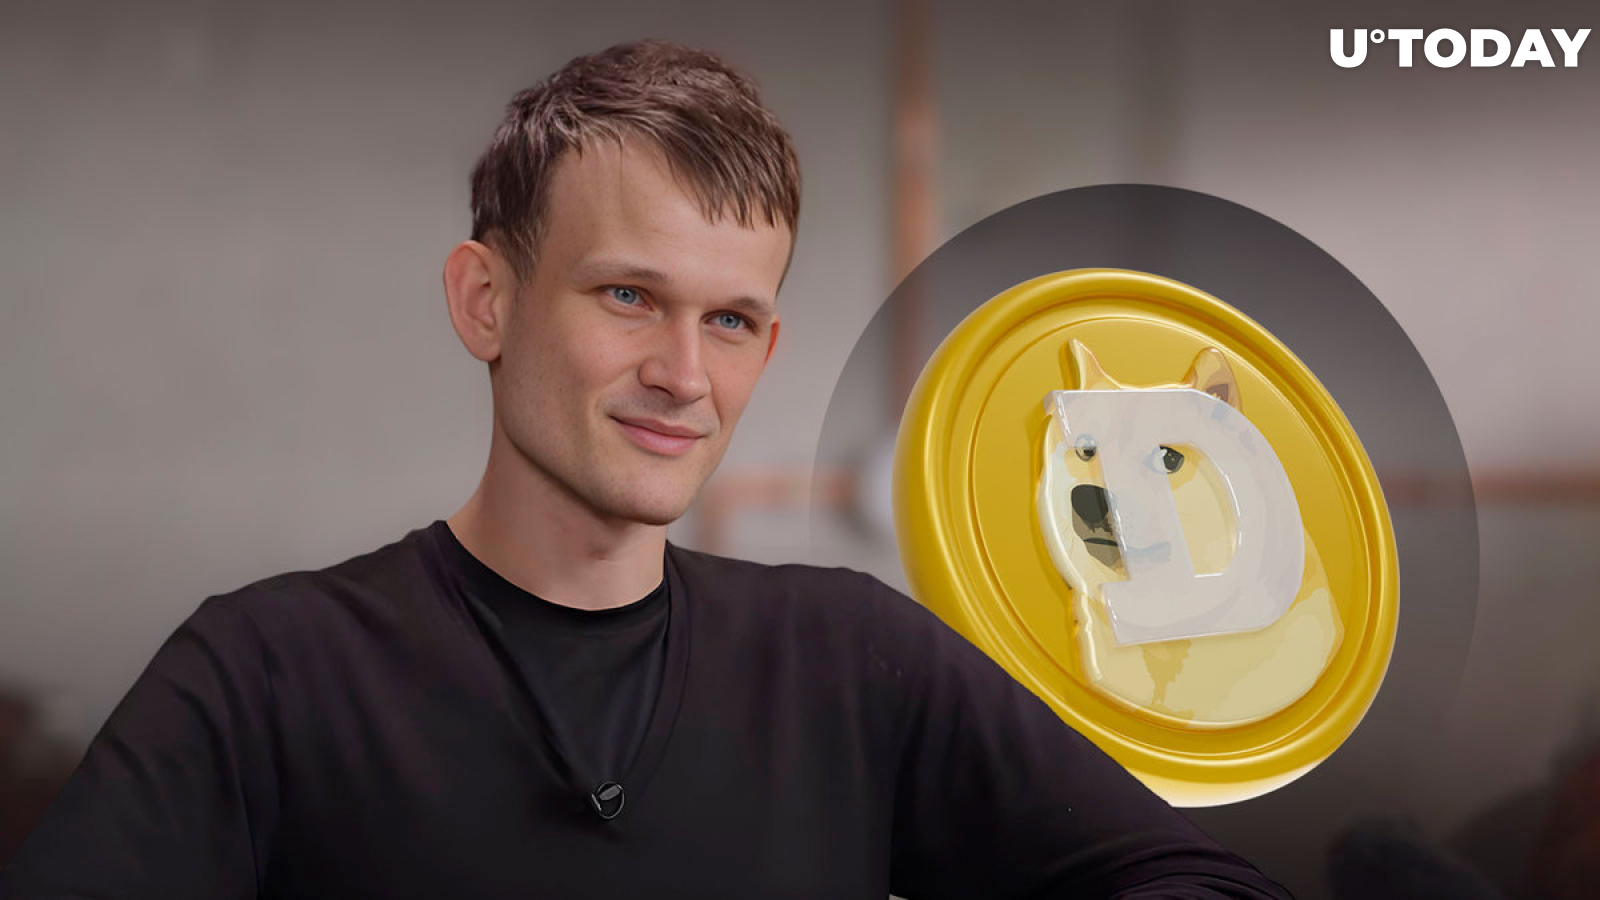 Vitalik Buterin Lends Hand of Support to DOGE Community